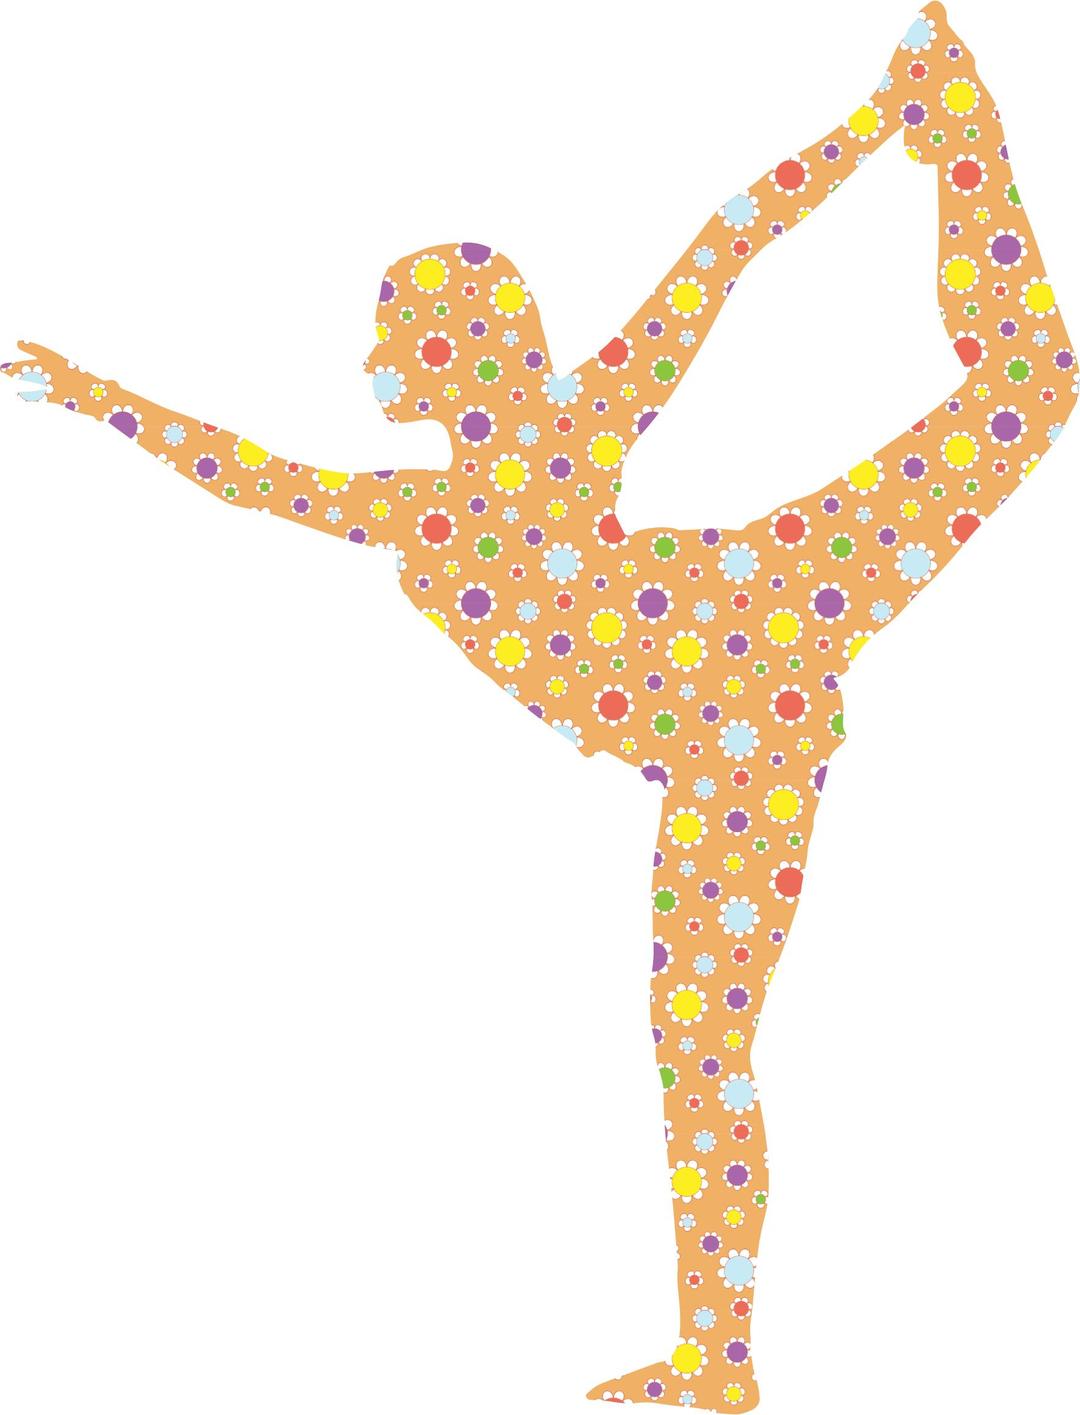 Cute Floral Female Yoga Pose Silhouette 5 png transparent